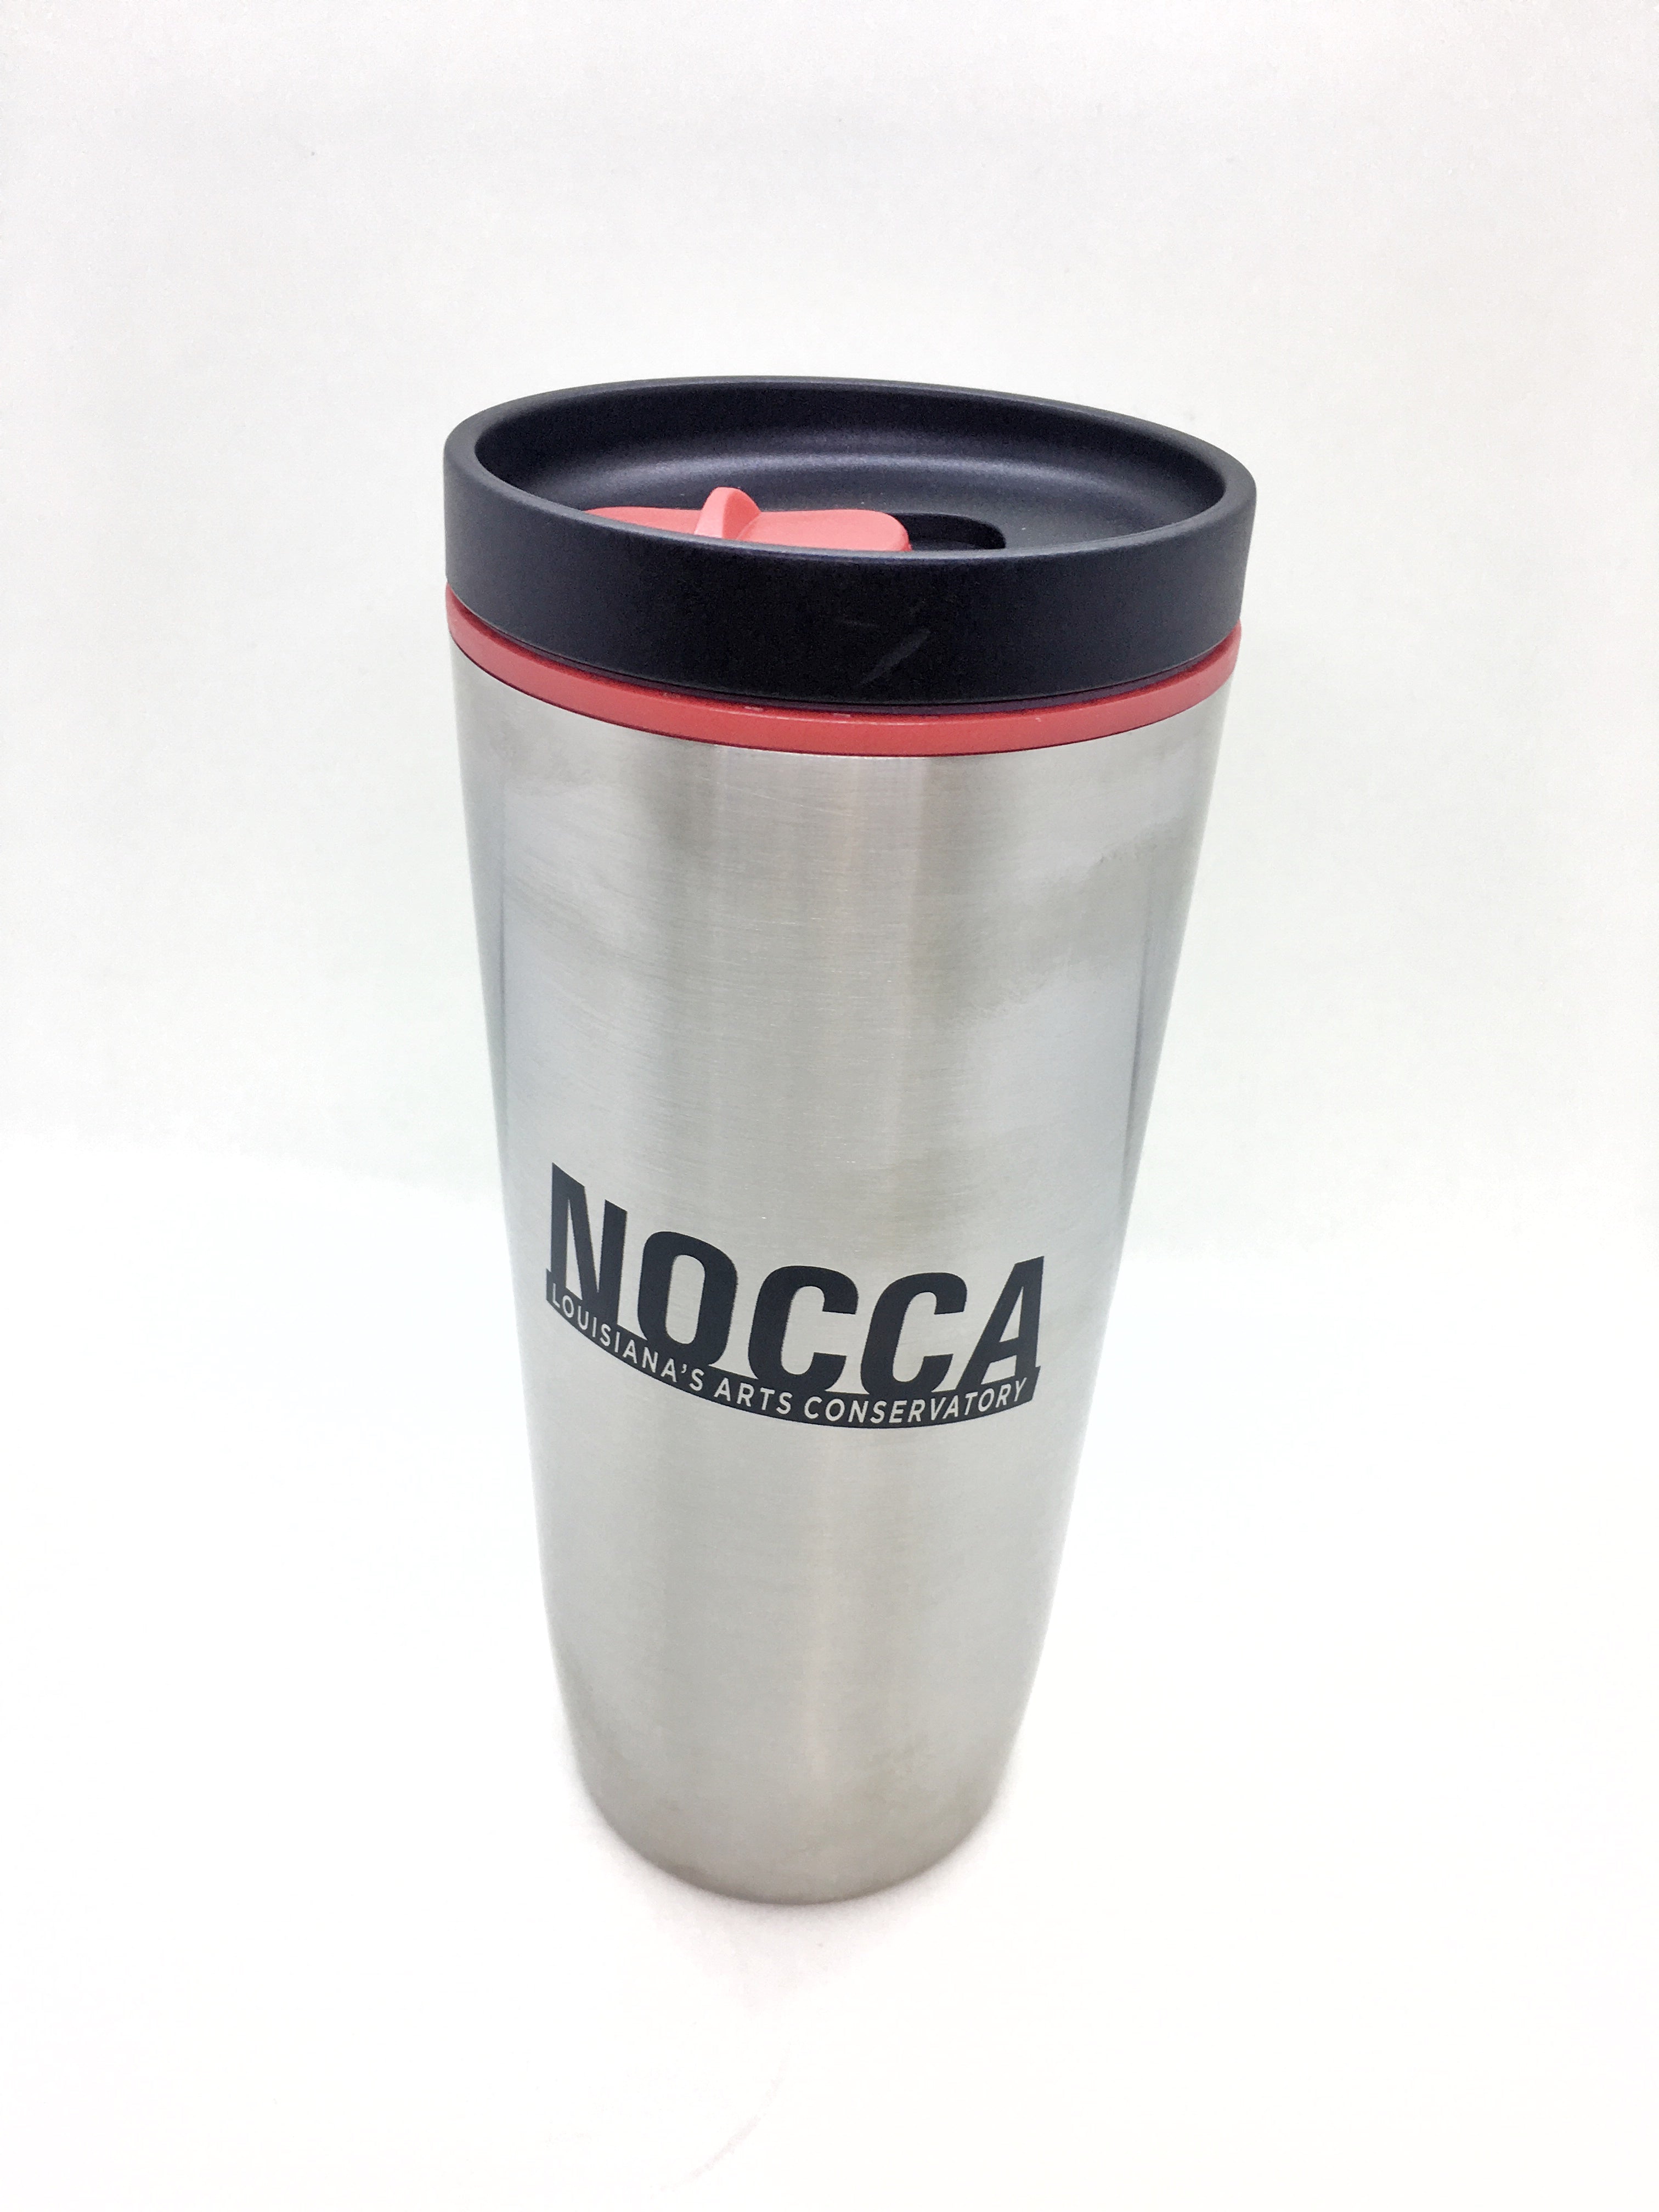 Stainless steel, 16-ounce tumbler with screw-on lid